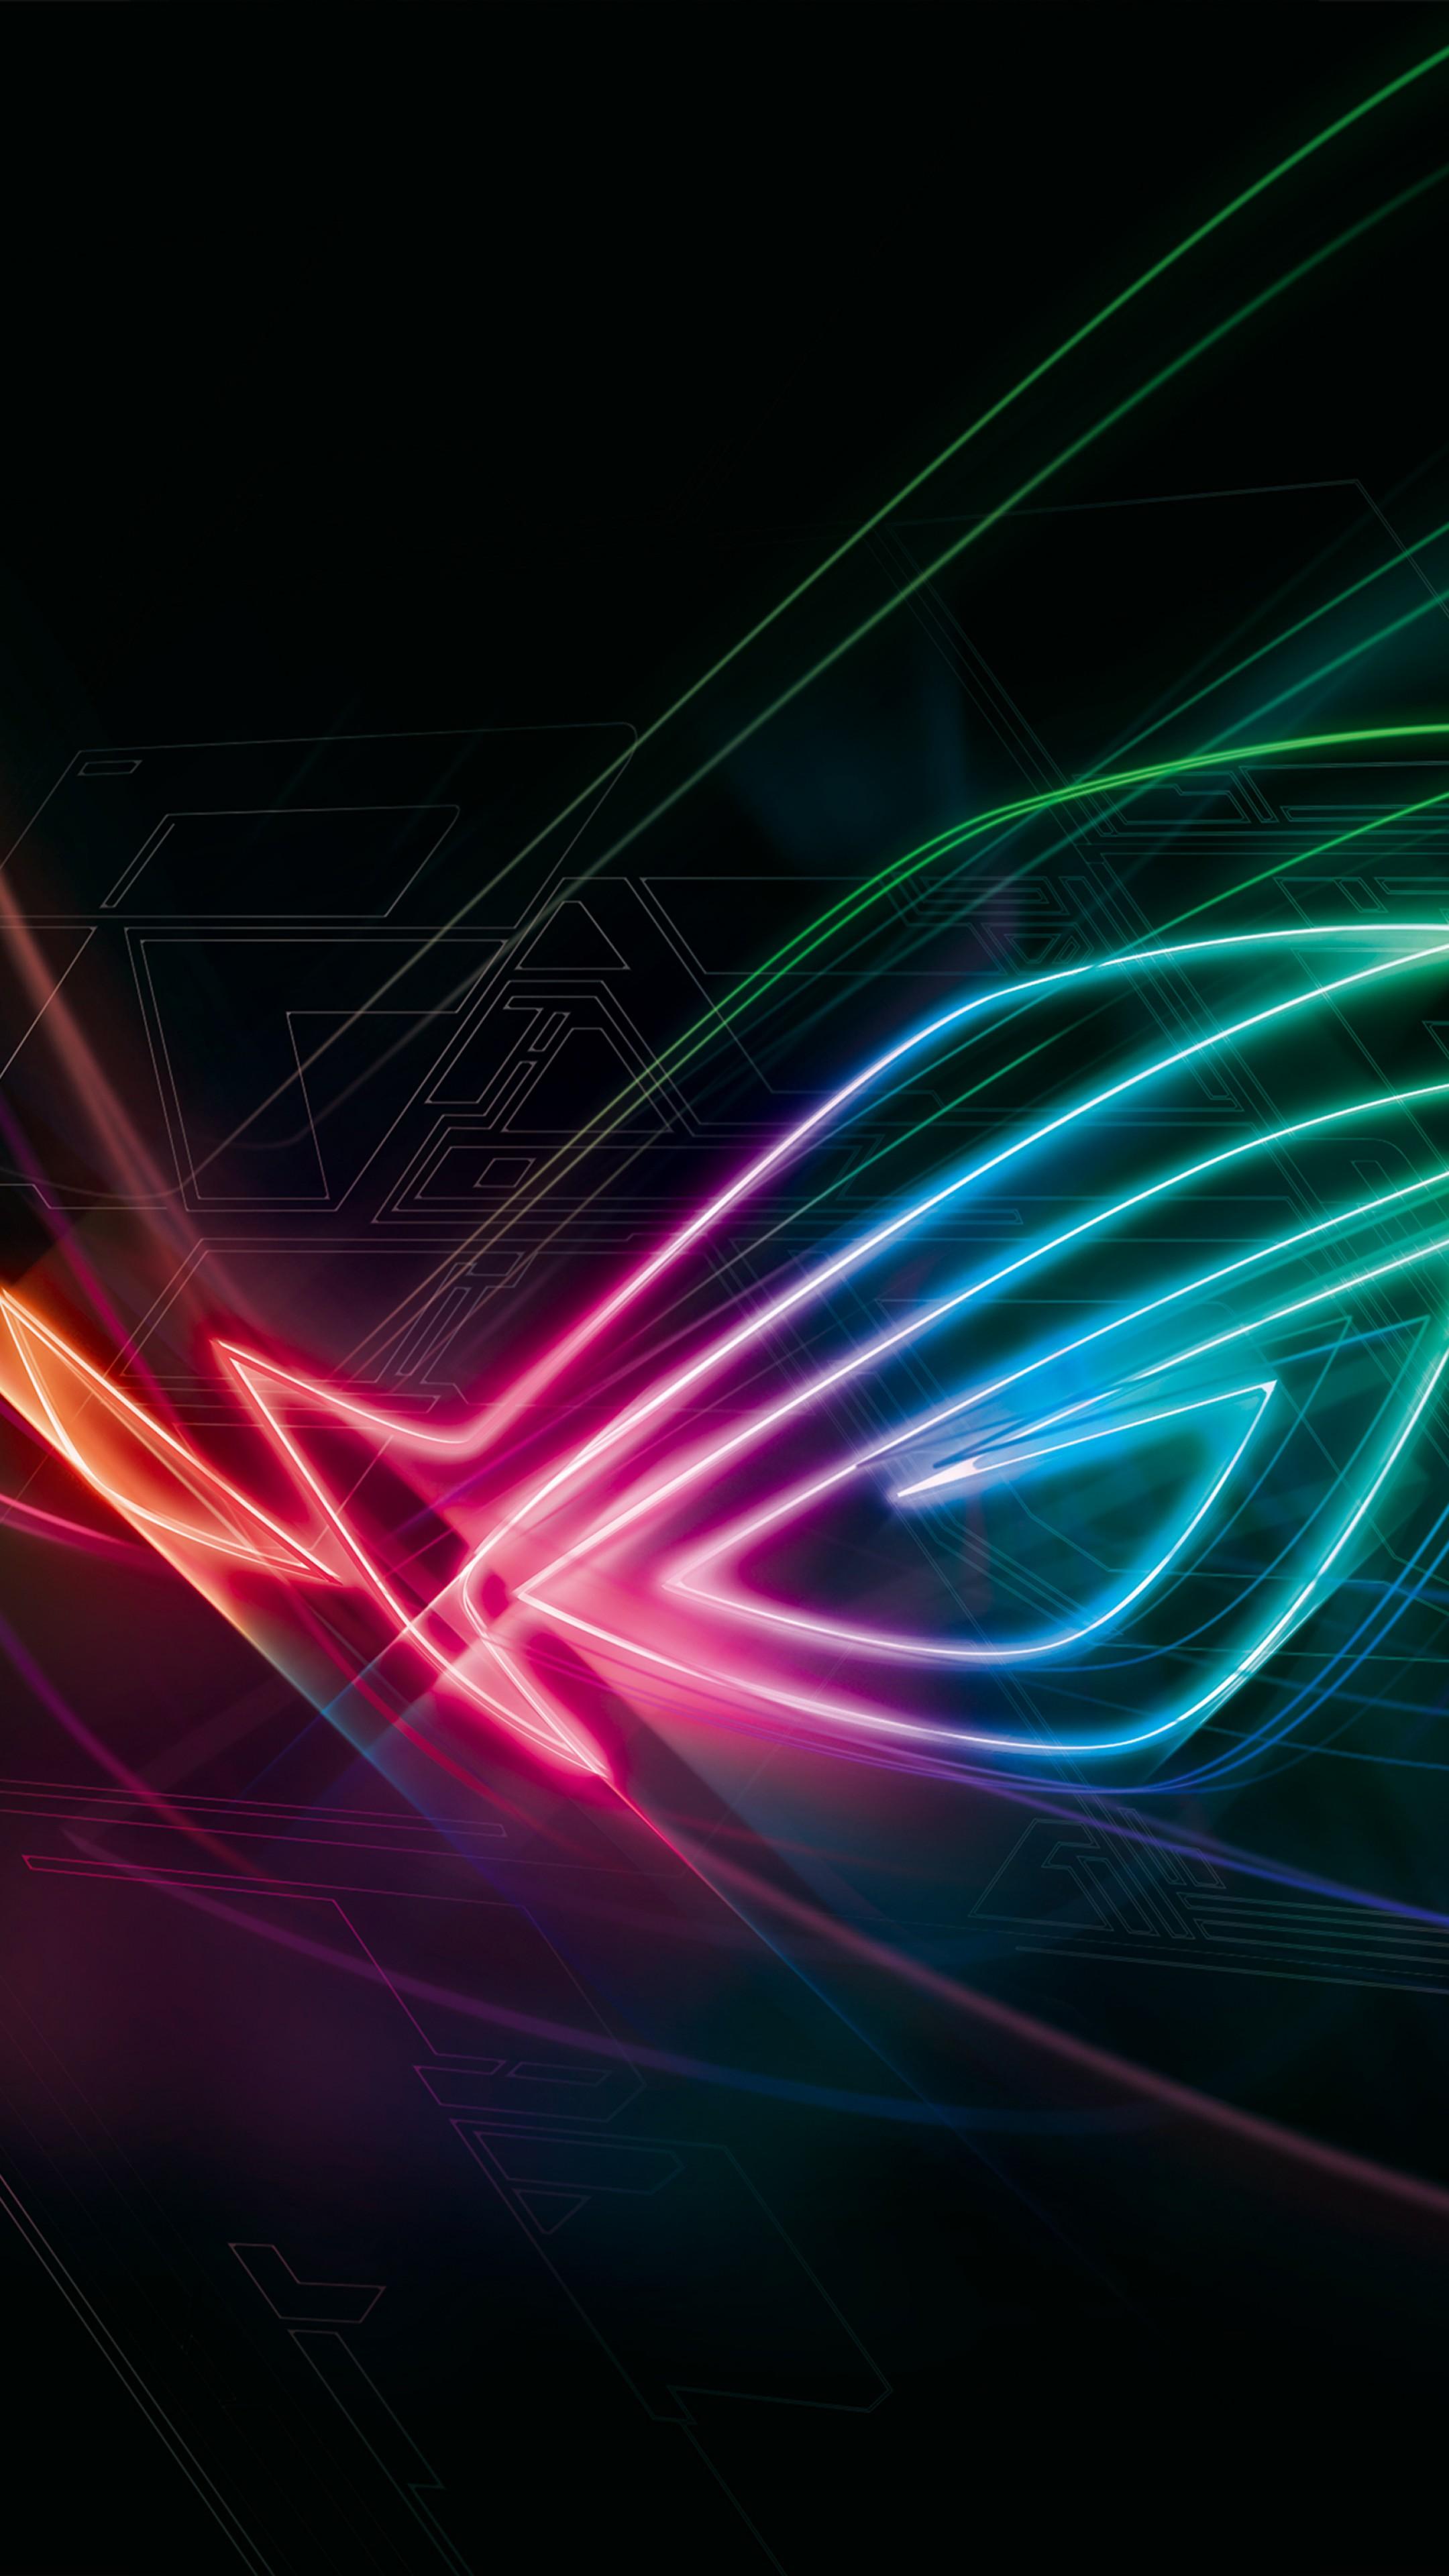 Wallpaper Asus ROG Phone colorful, Android 9 Pie, 4K, OS